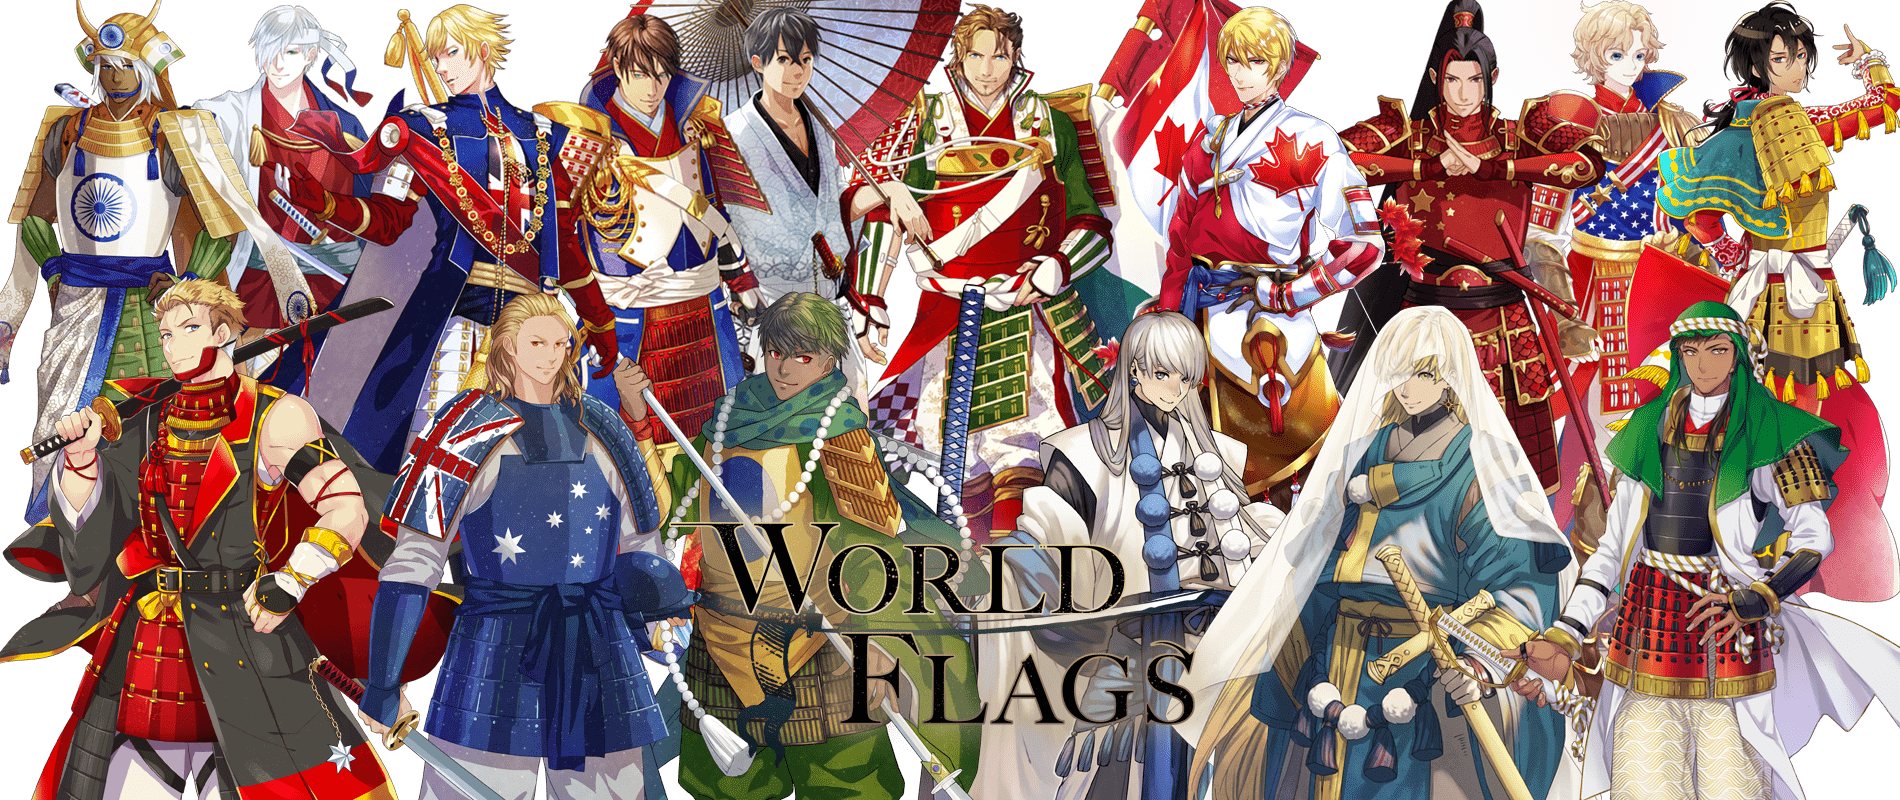 World Flags Attending Countries Introduced With A Samurai Anime Character For 2020 Tokyo Olympics By Yohei Yamaguchi Medium